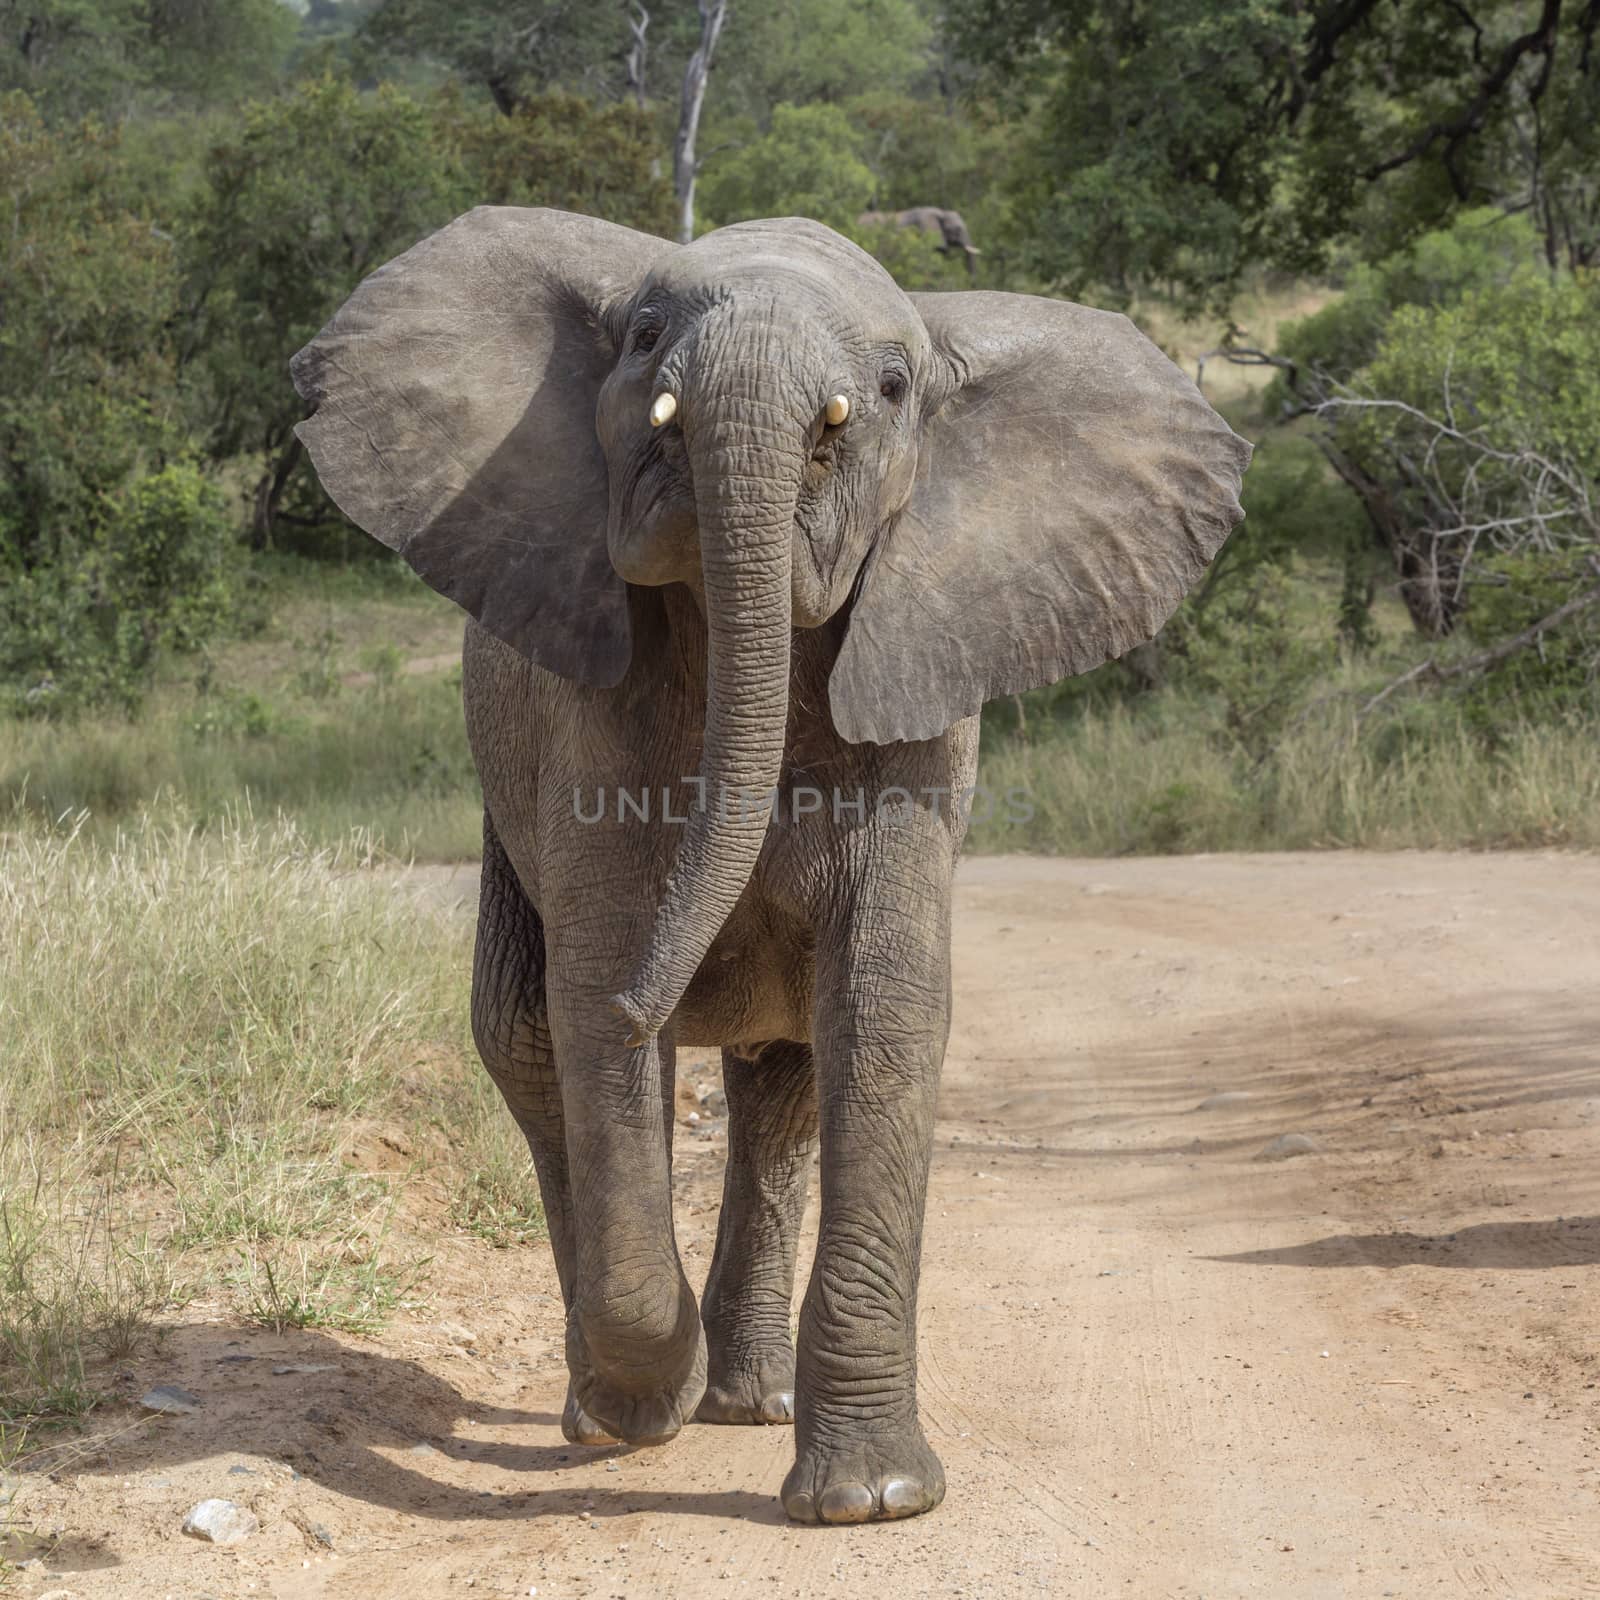 African bush elephant charging on gravel road in Kruger National park, South Africa ; Specie Loxodonta africana family of Elephantidae